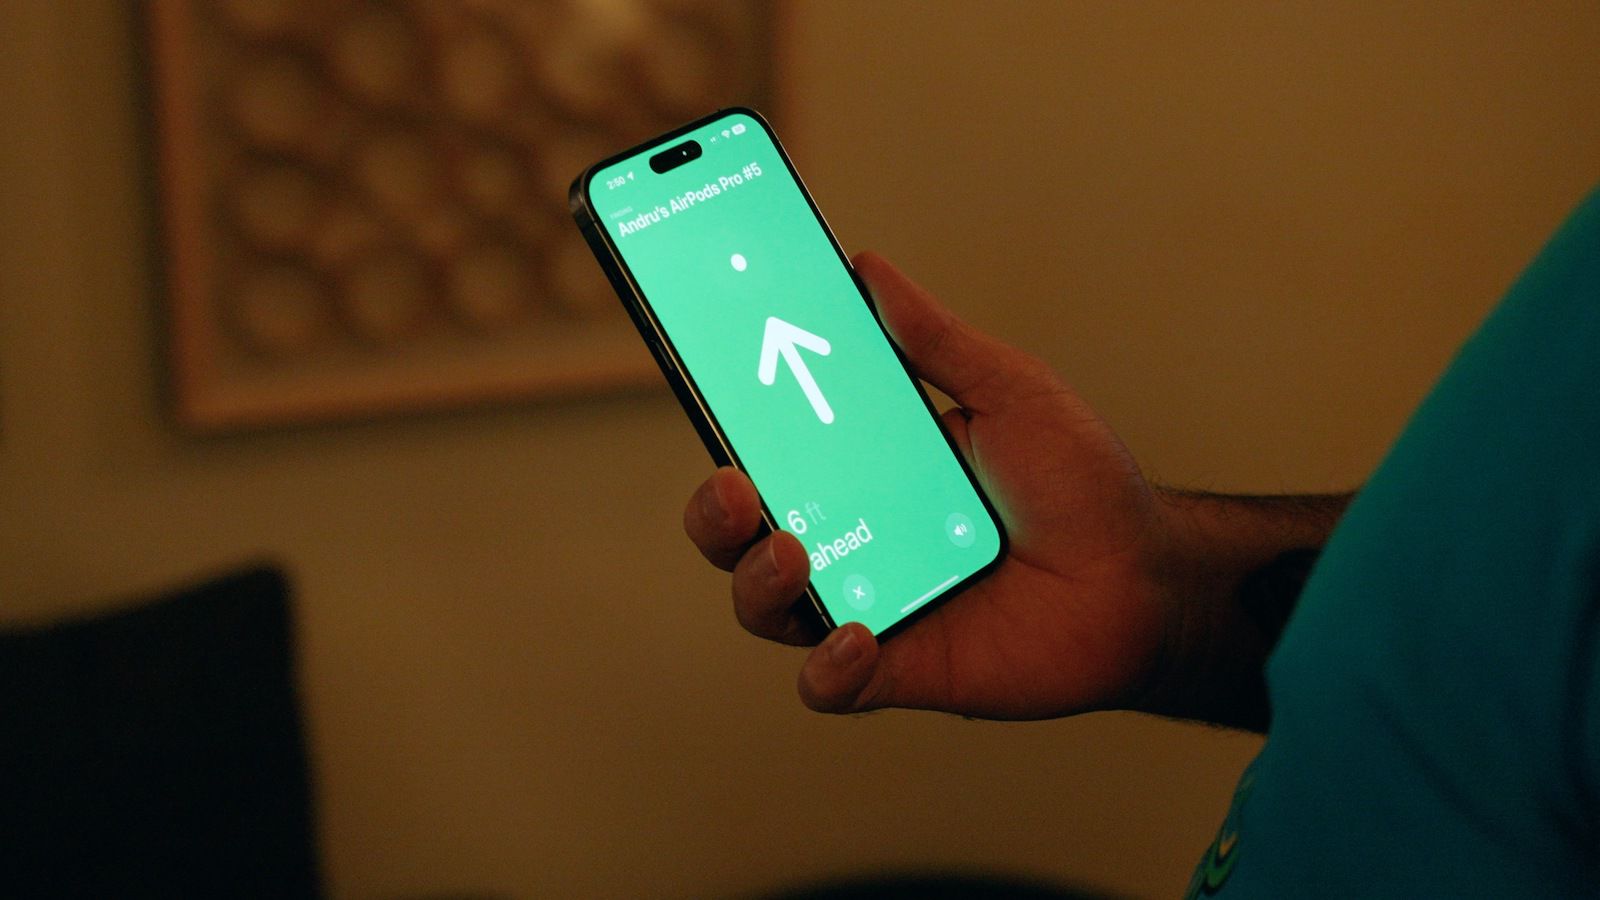 From iPhoneIslam.com, A person holds a smartphone, displays a navigation app with a directional arrow, and wears AirPods.